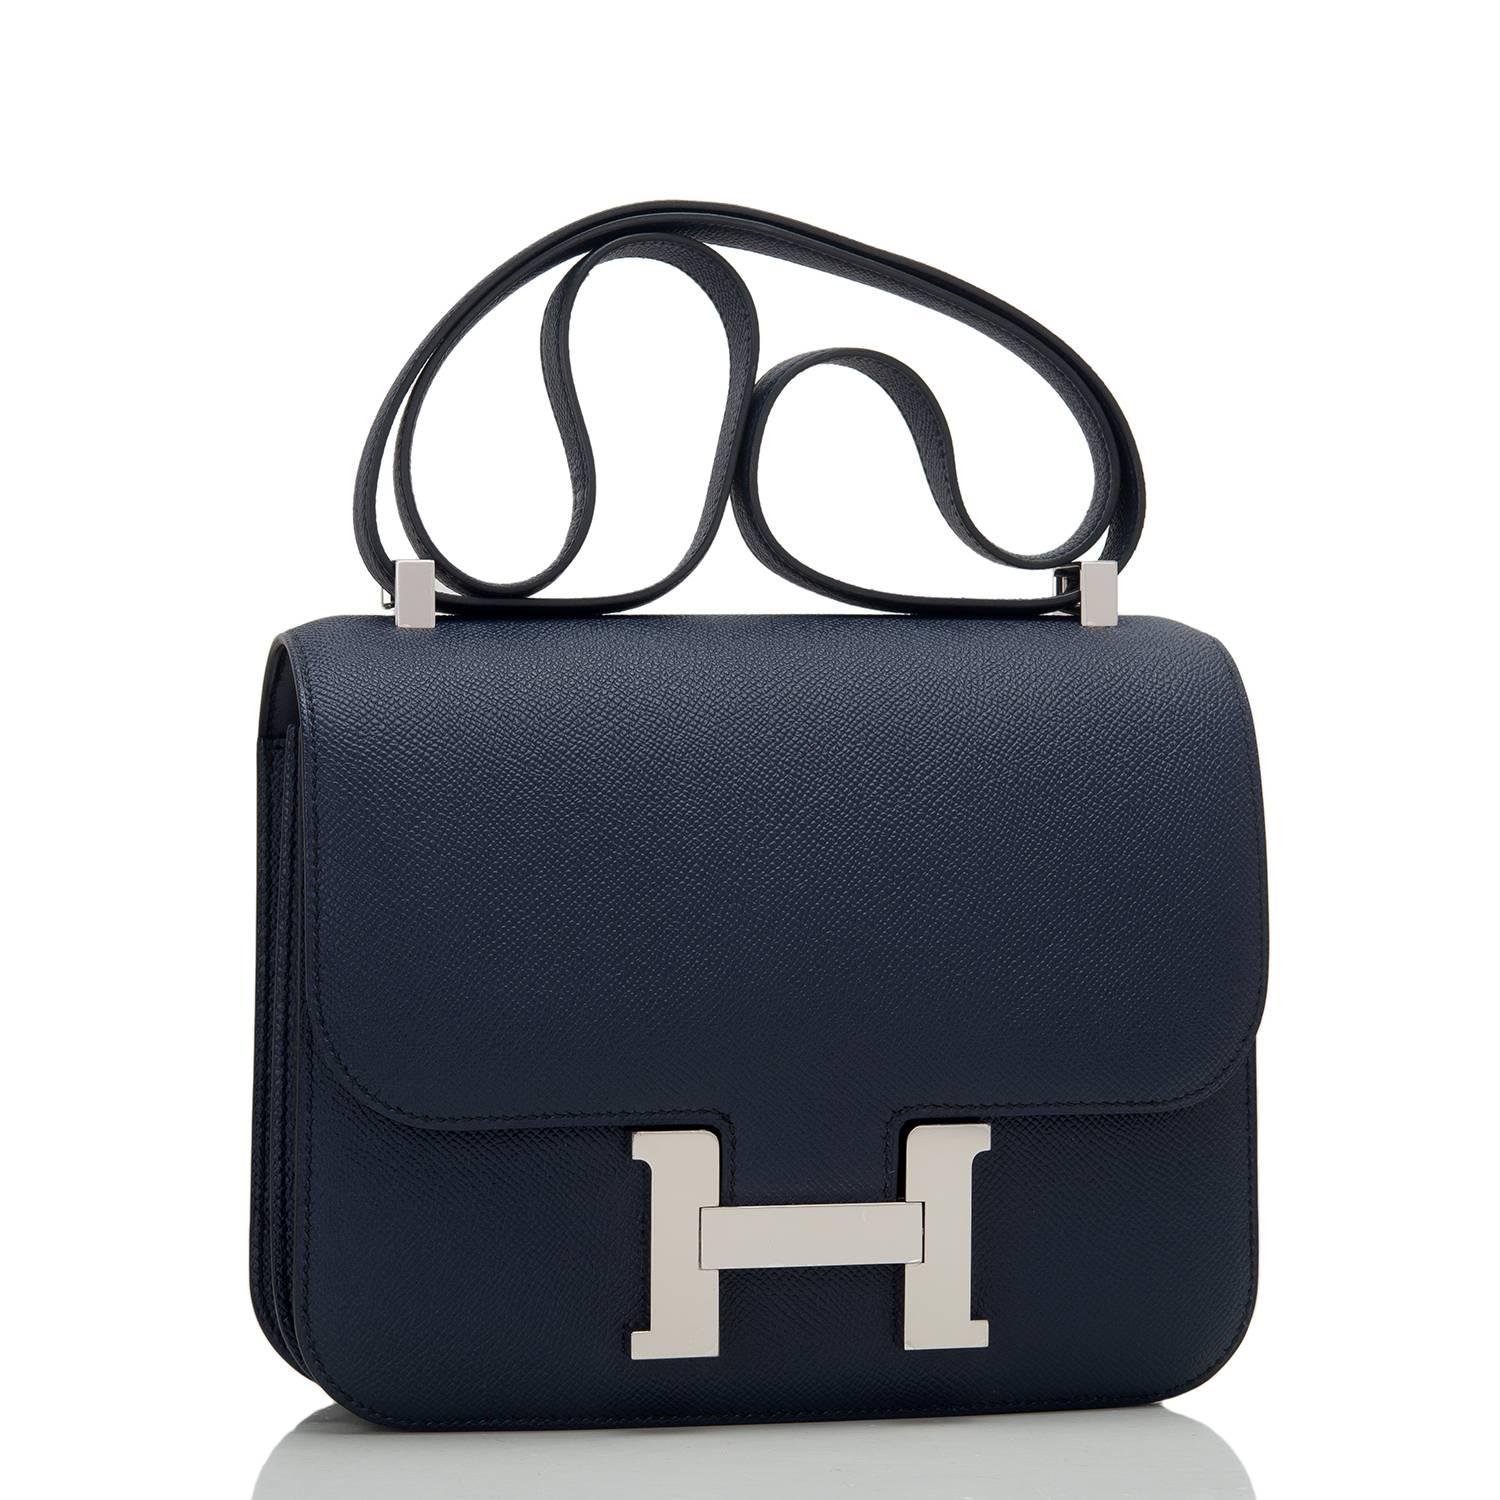 Hermes Indigo Constance 24cm of epsom leather with palladium hardware.

This Constance has tonal stitching, a metal 